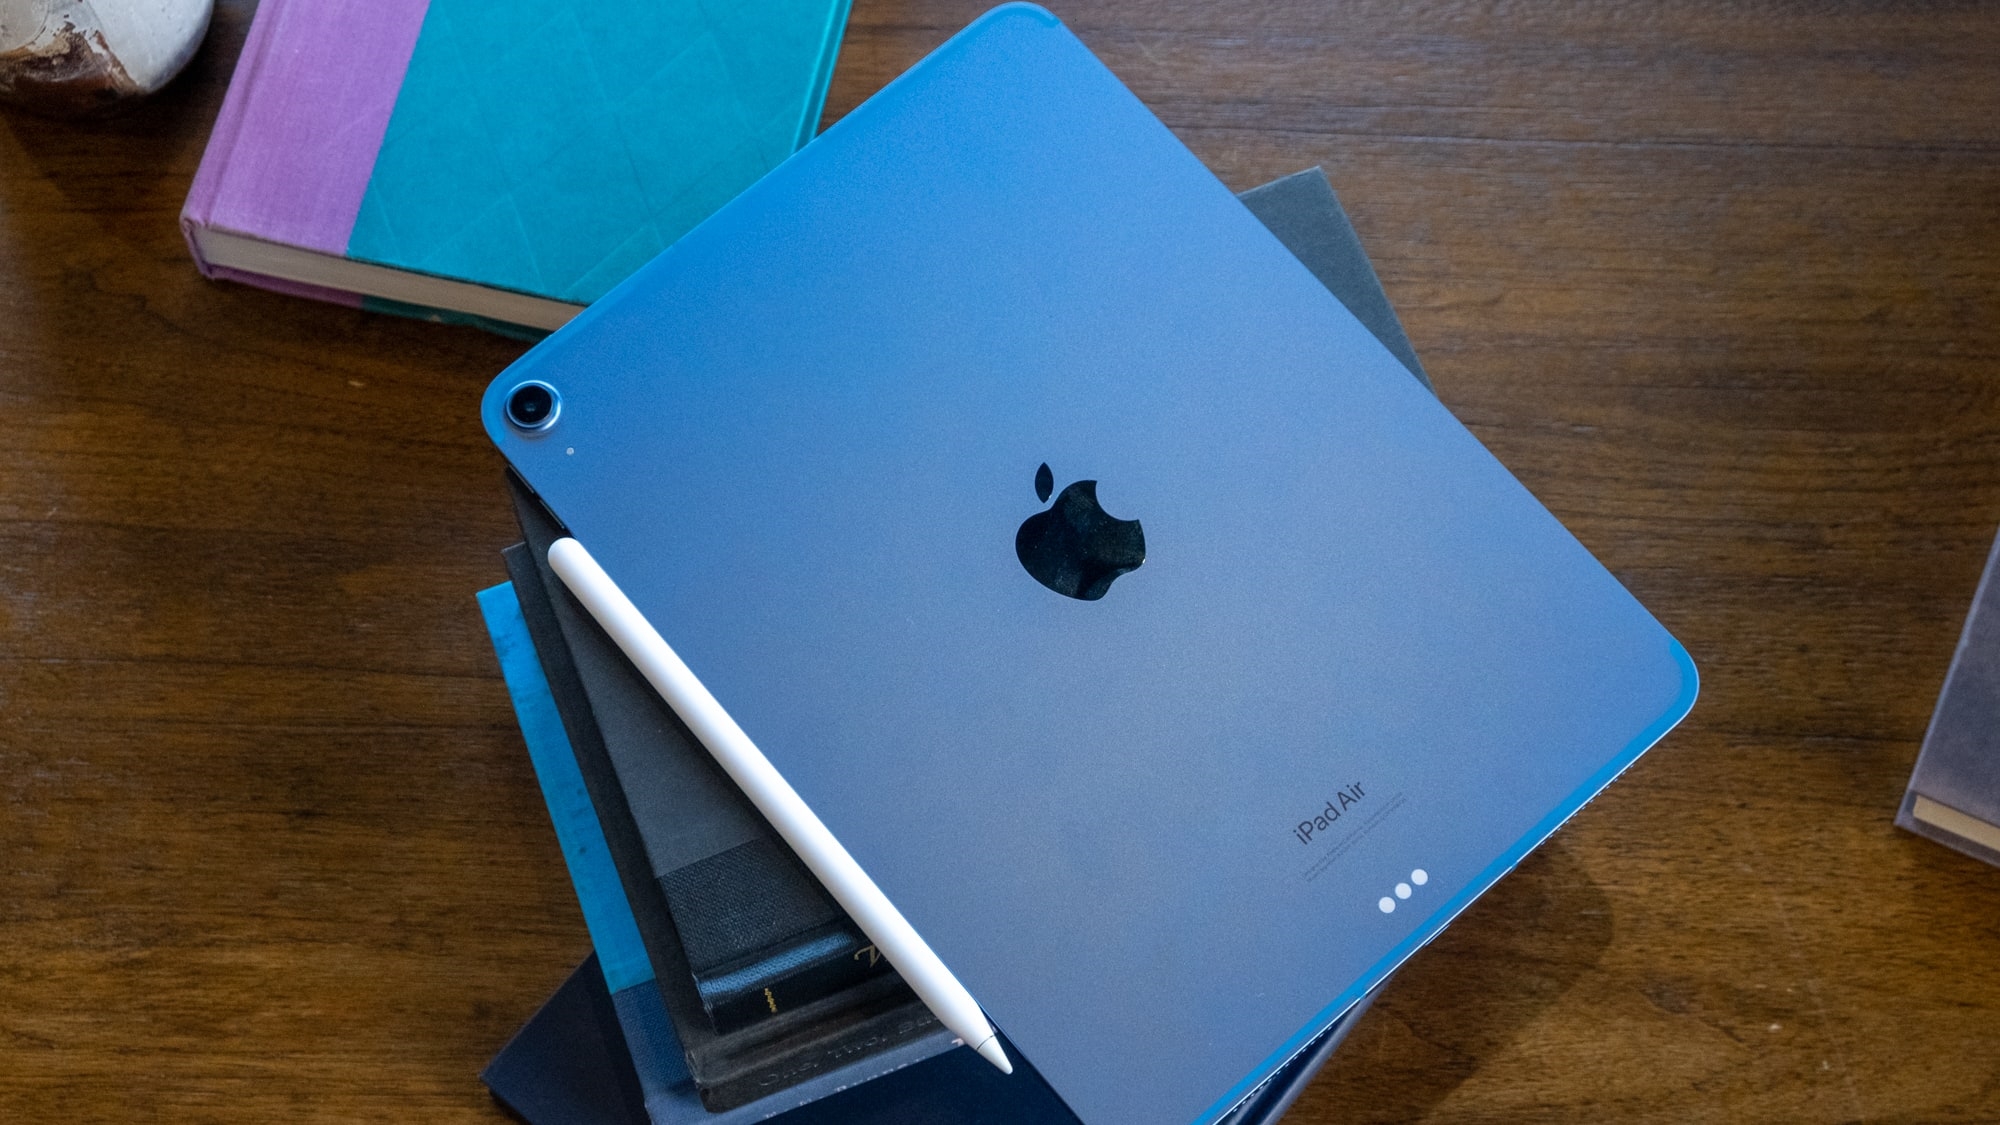 Apple's iPad Air drops back to $500, plus the rest of the week's best tech deals | DeviceDaily.com